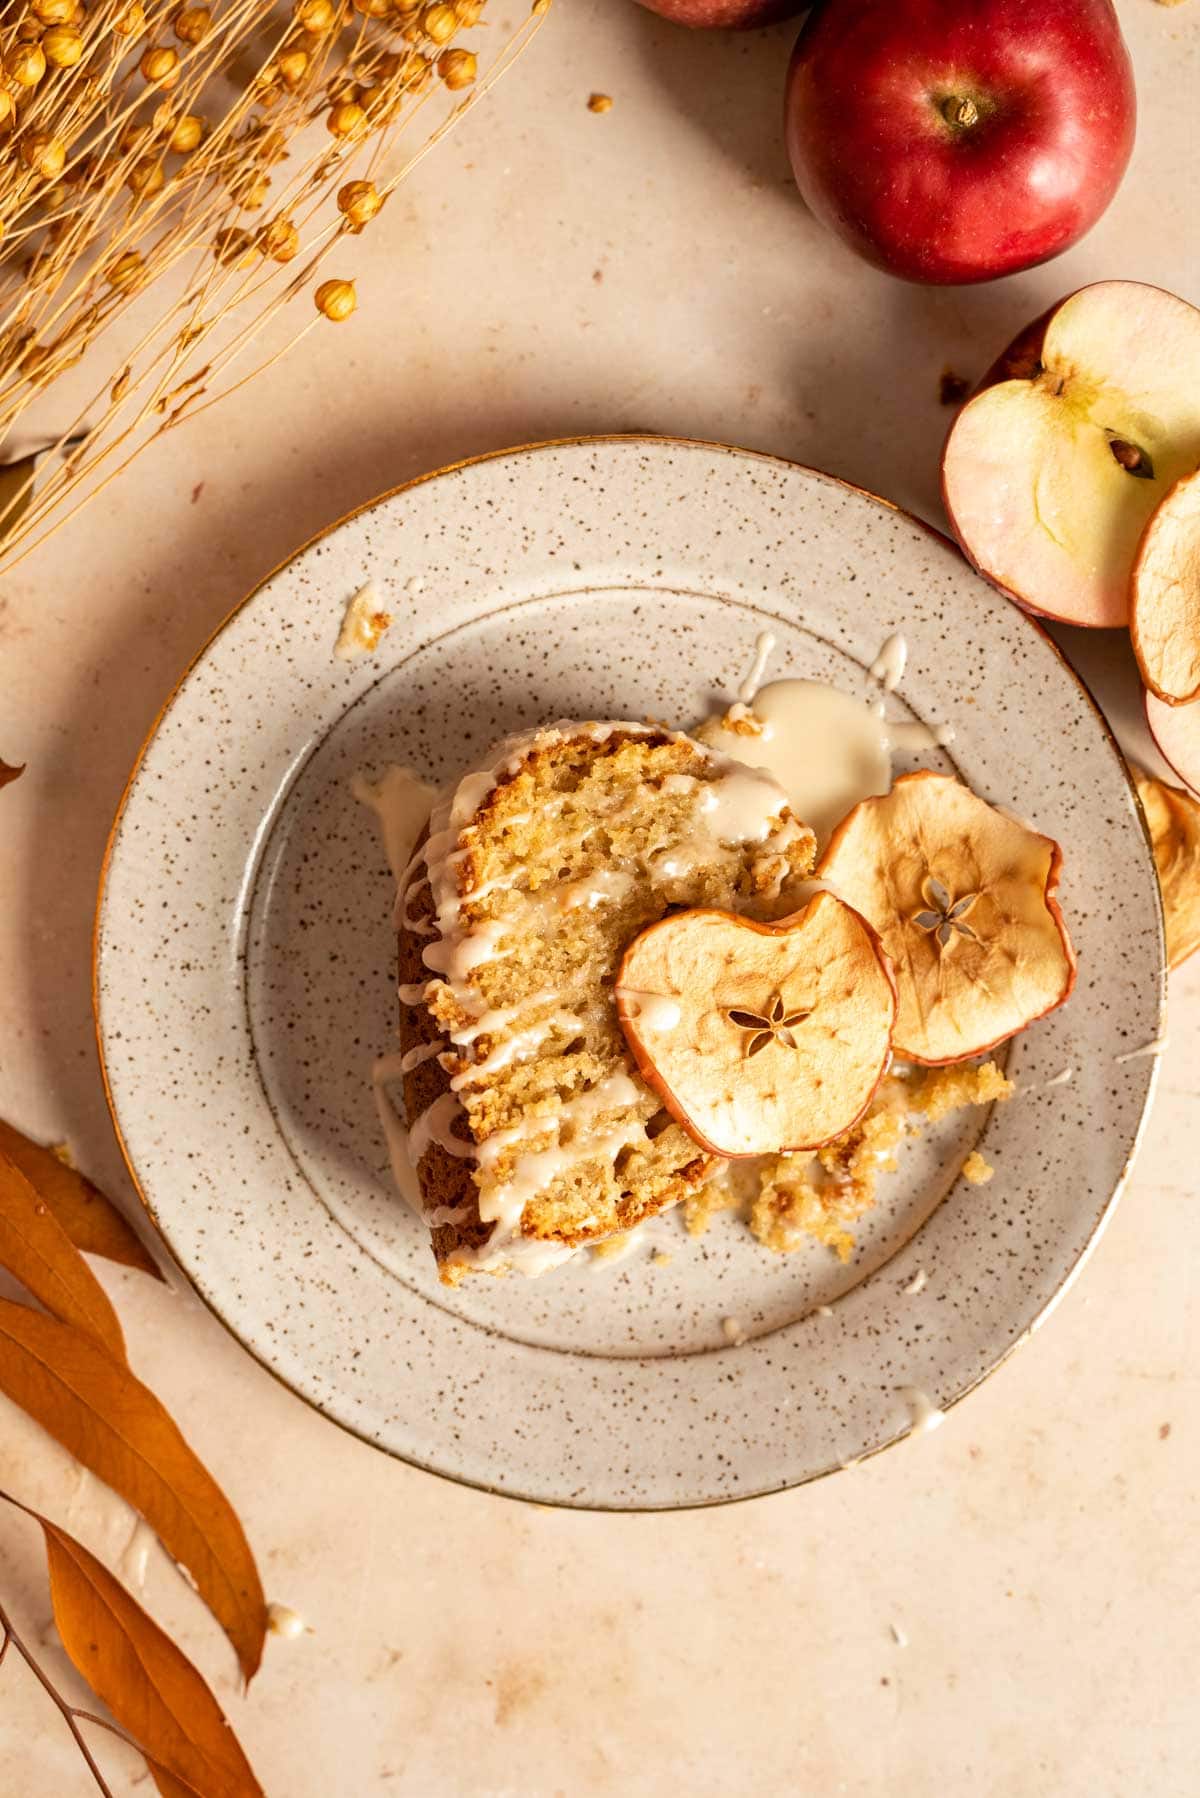 A slice of apple butter cake on a spekled plate with dried apple slices.